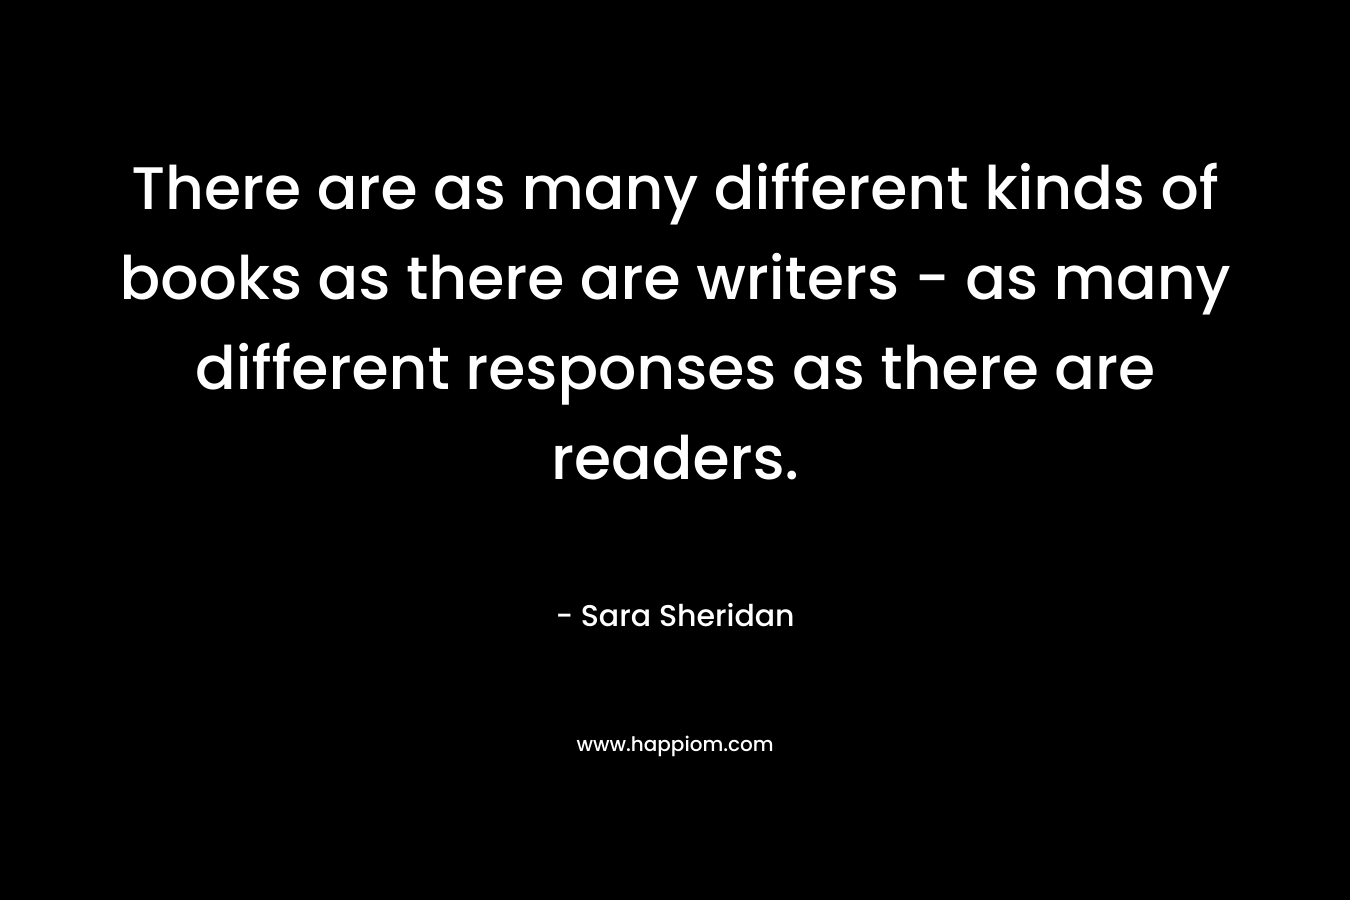 There are as many different kinds of books as there are writers – as many different responses as there are readers. – Sara Sheridan